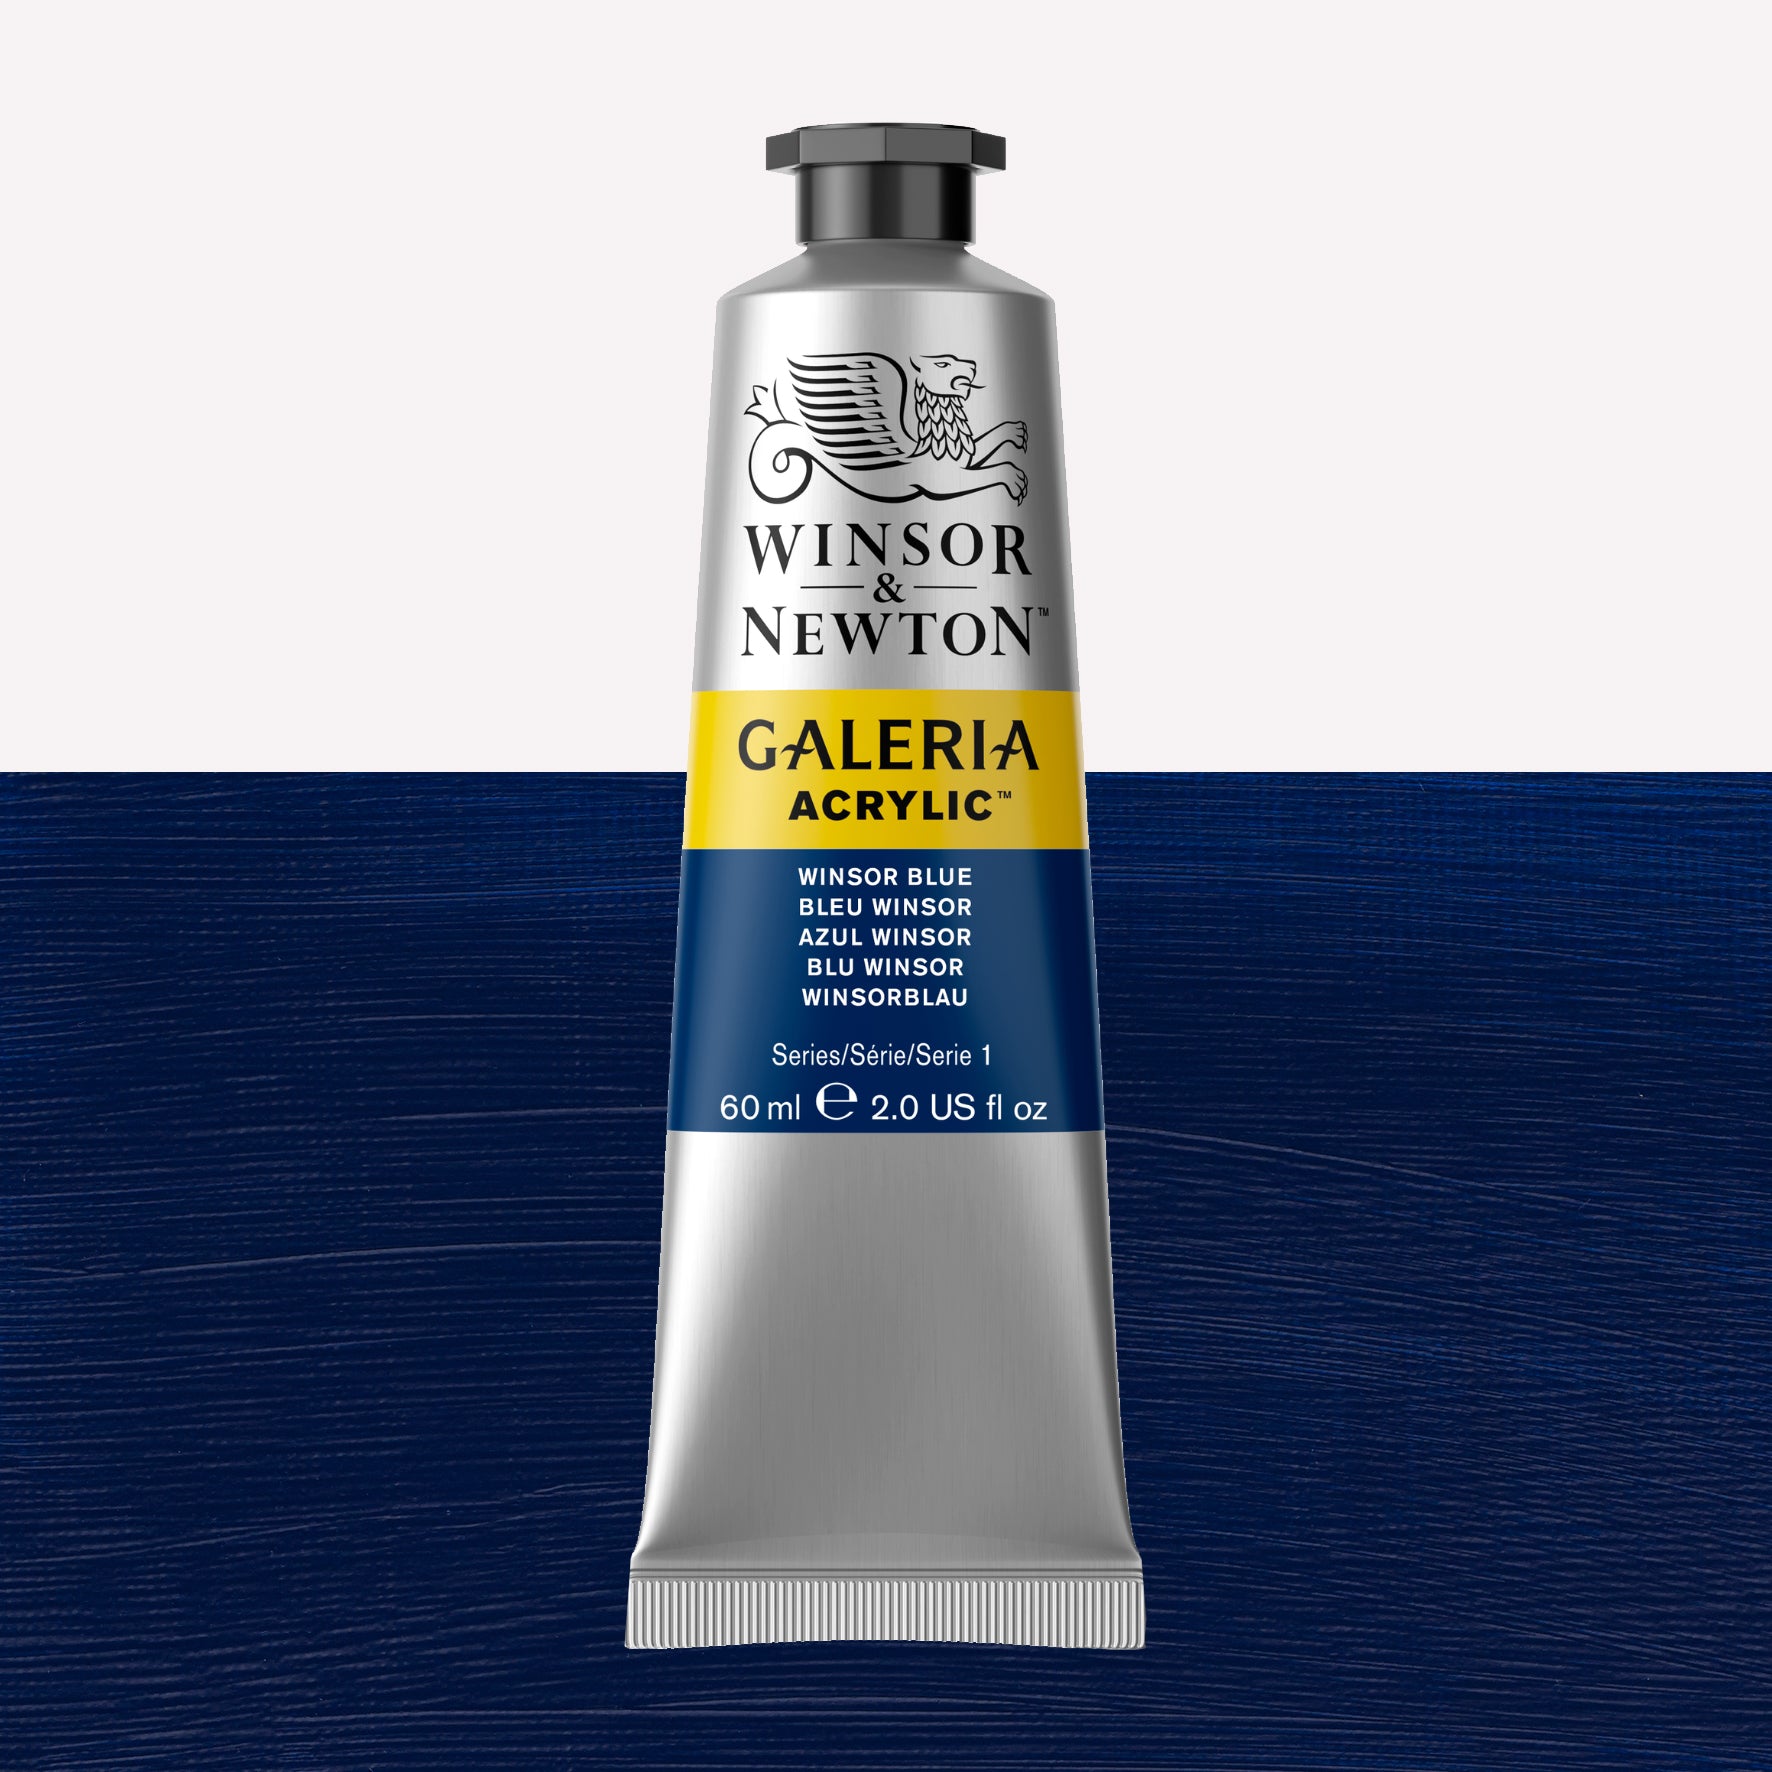 A 60ml tube of vibrant Galeria Acrylic paint in the shade Winsor Blue. This professional-quality paint is packaged in a silver tube with a black lid. Made by Winsor and Newton.